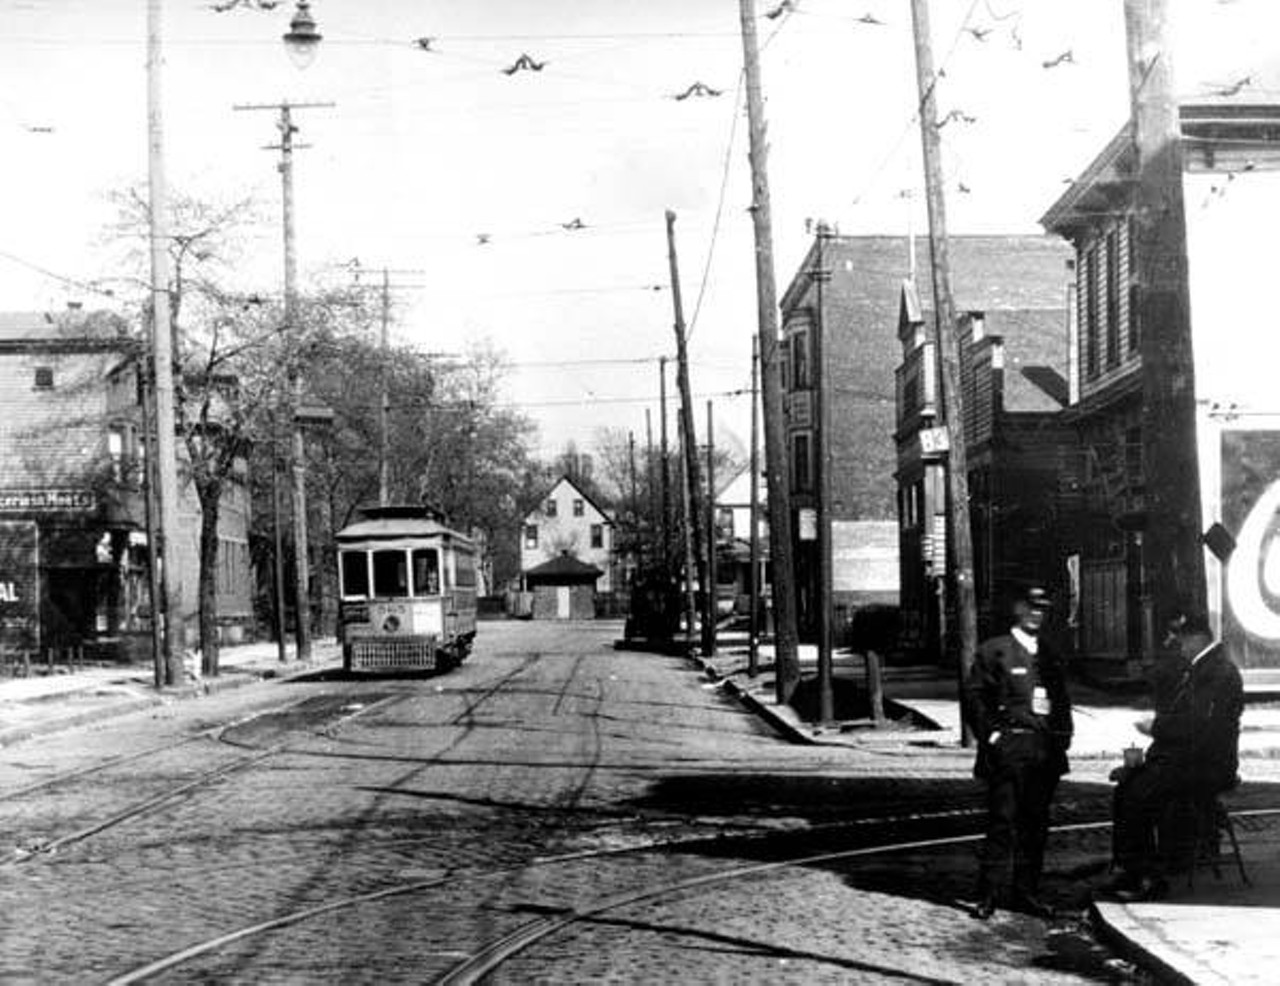 Cleveland Railway Car 565 at Central Ave. and East 83rd Street, 1905